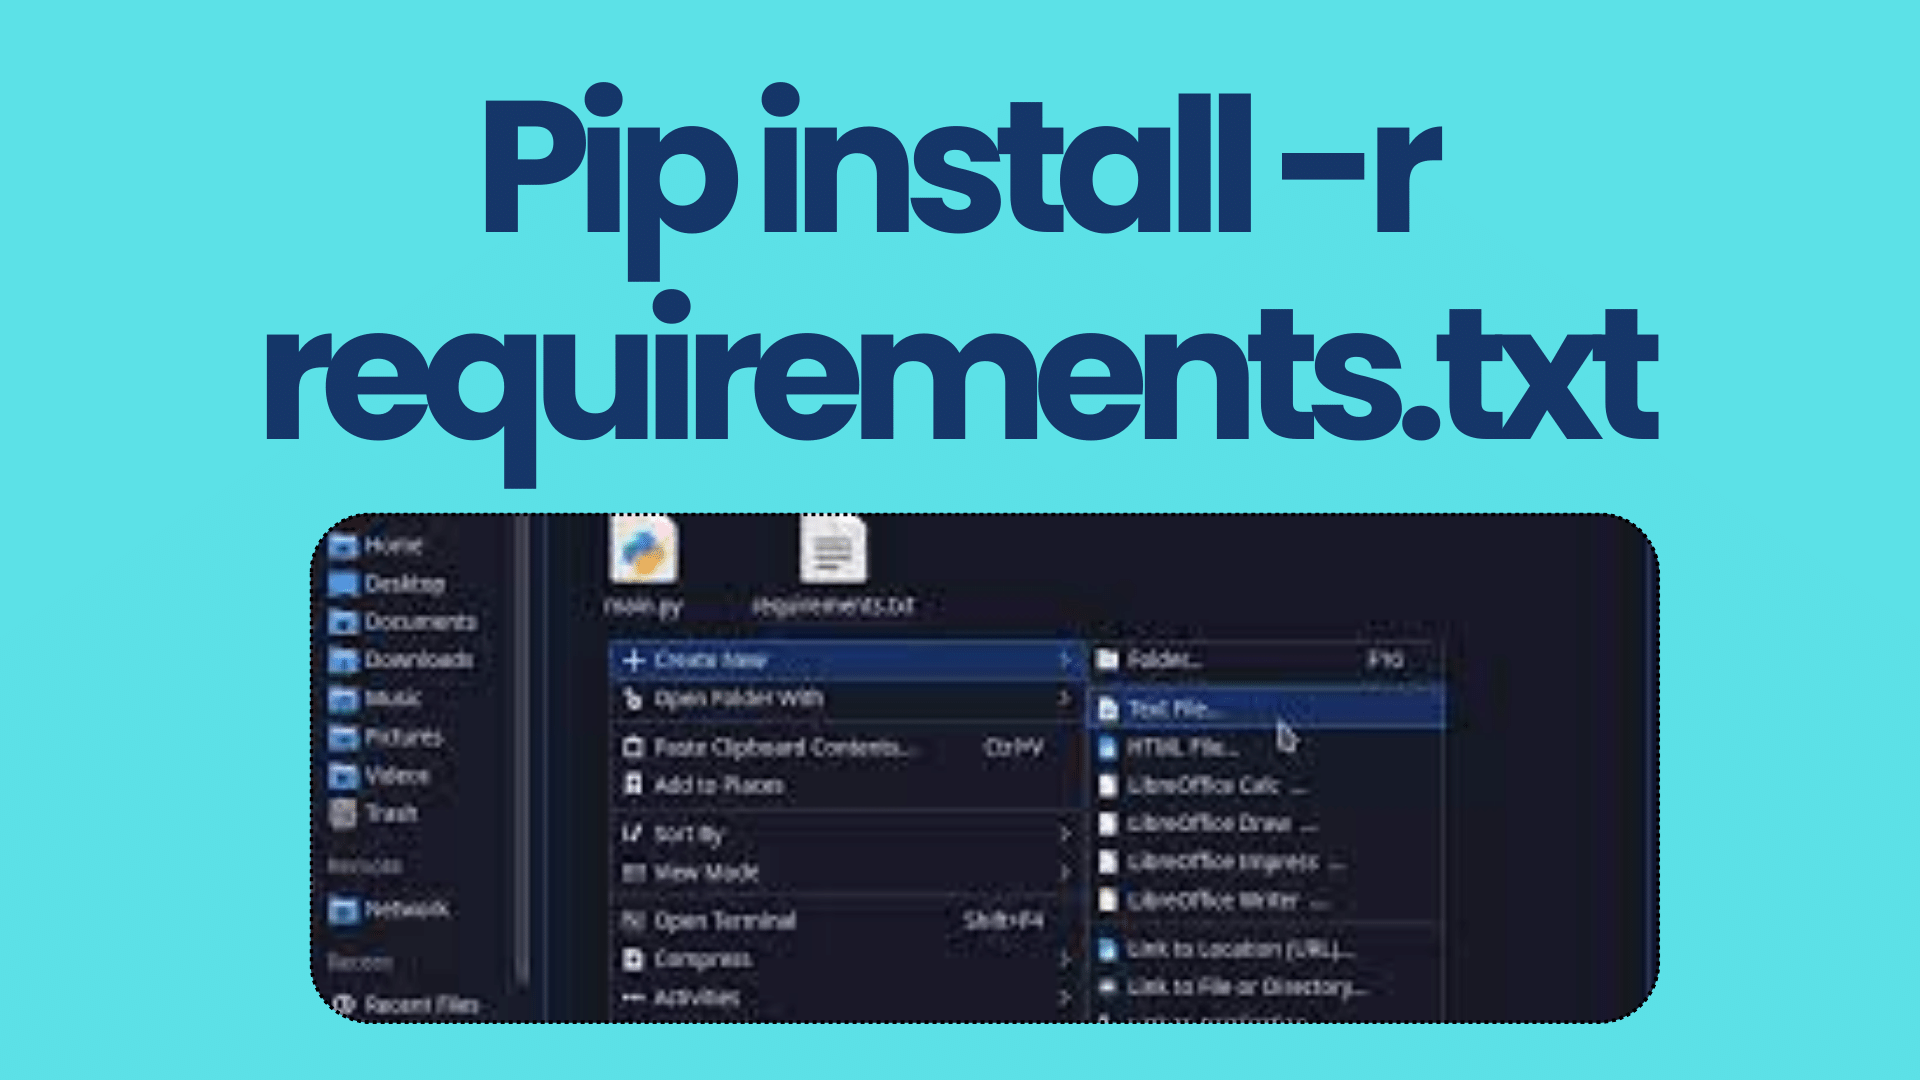 Pip install -r requirements.txt